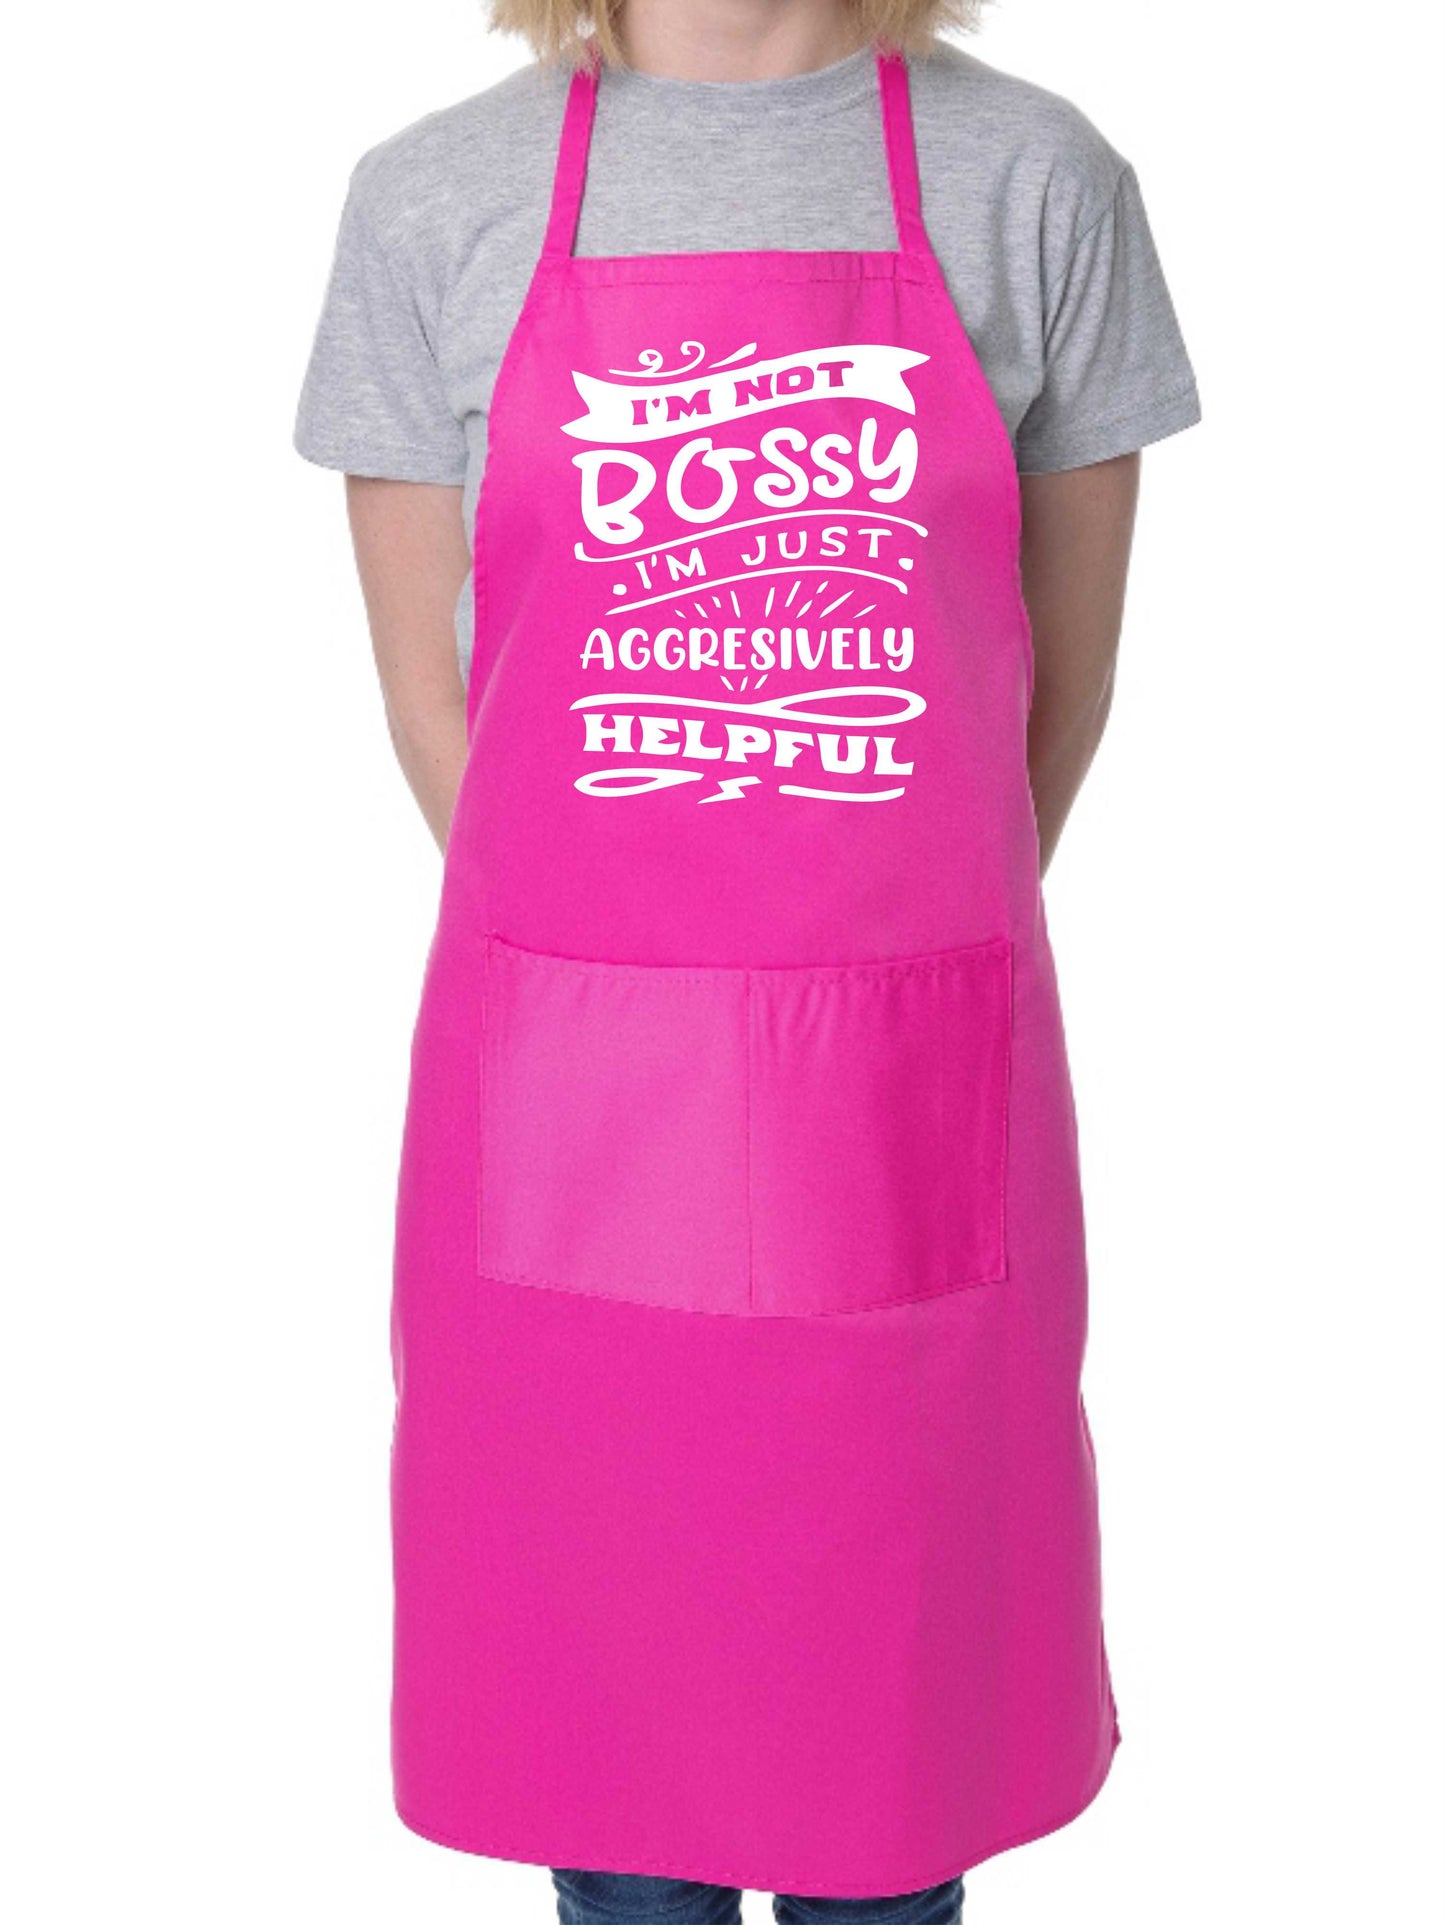 I'm Not Bossy Just Aggresively Helpful Apron Funny Birthday Gift Cooking Baking